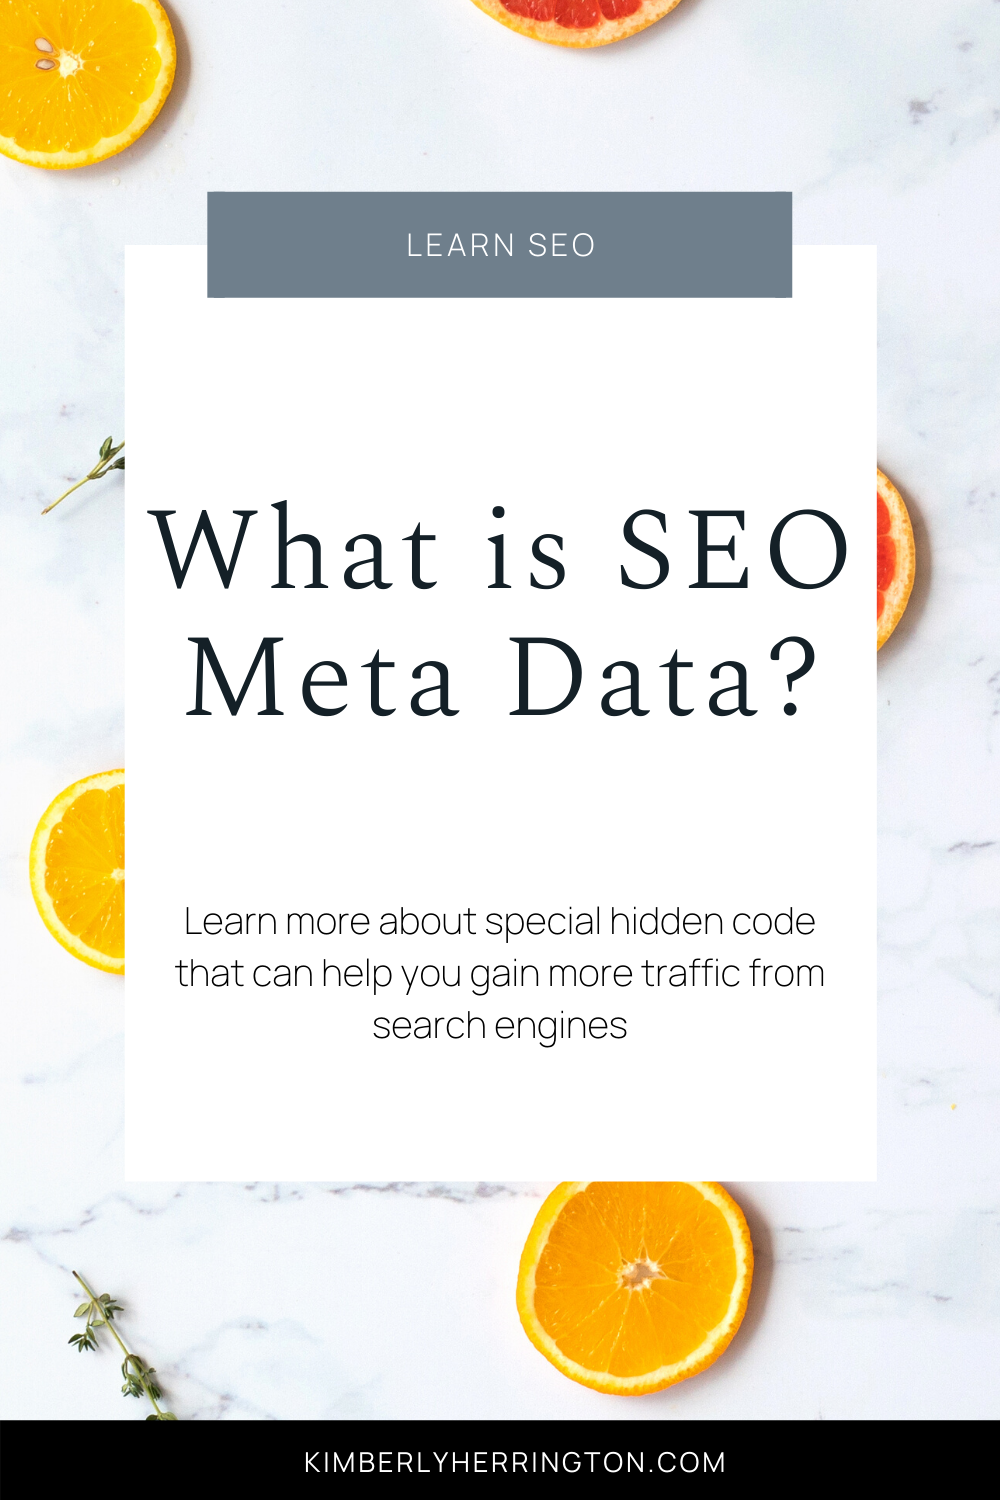 What is meta data?